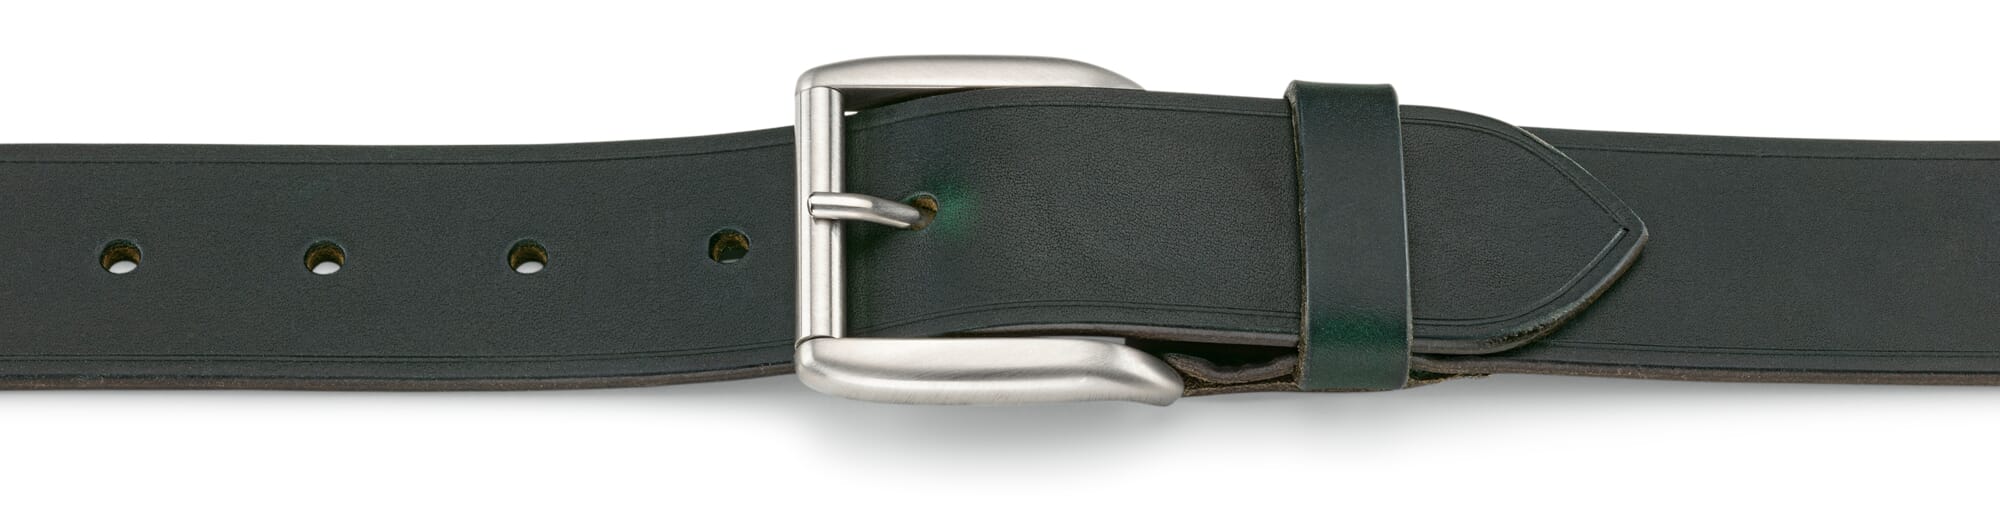 Artisanal Green Leather Belt: Handcrafted with Layers of